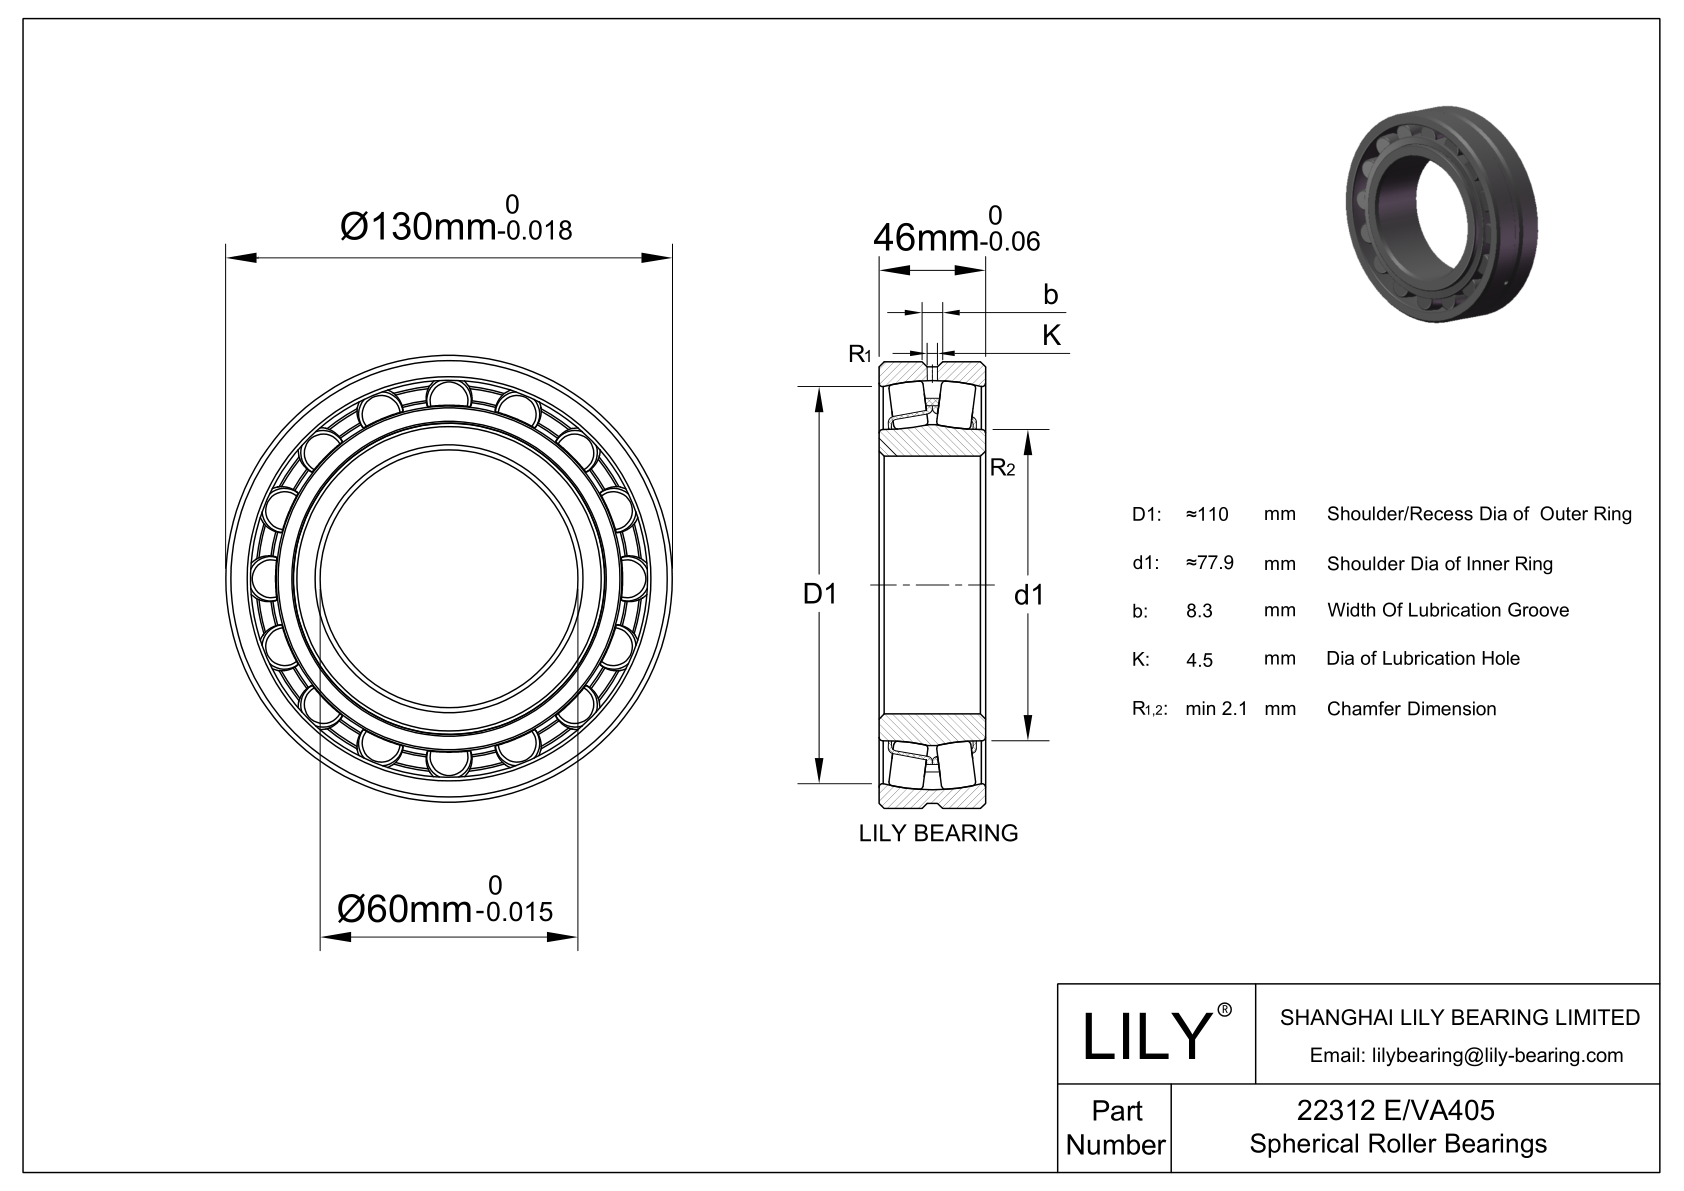 22312 E/VA405 Double Row Spherical Roller Bearing cad drawing